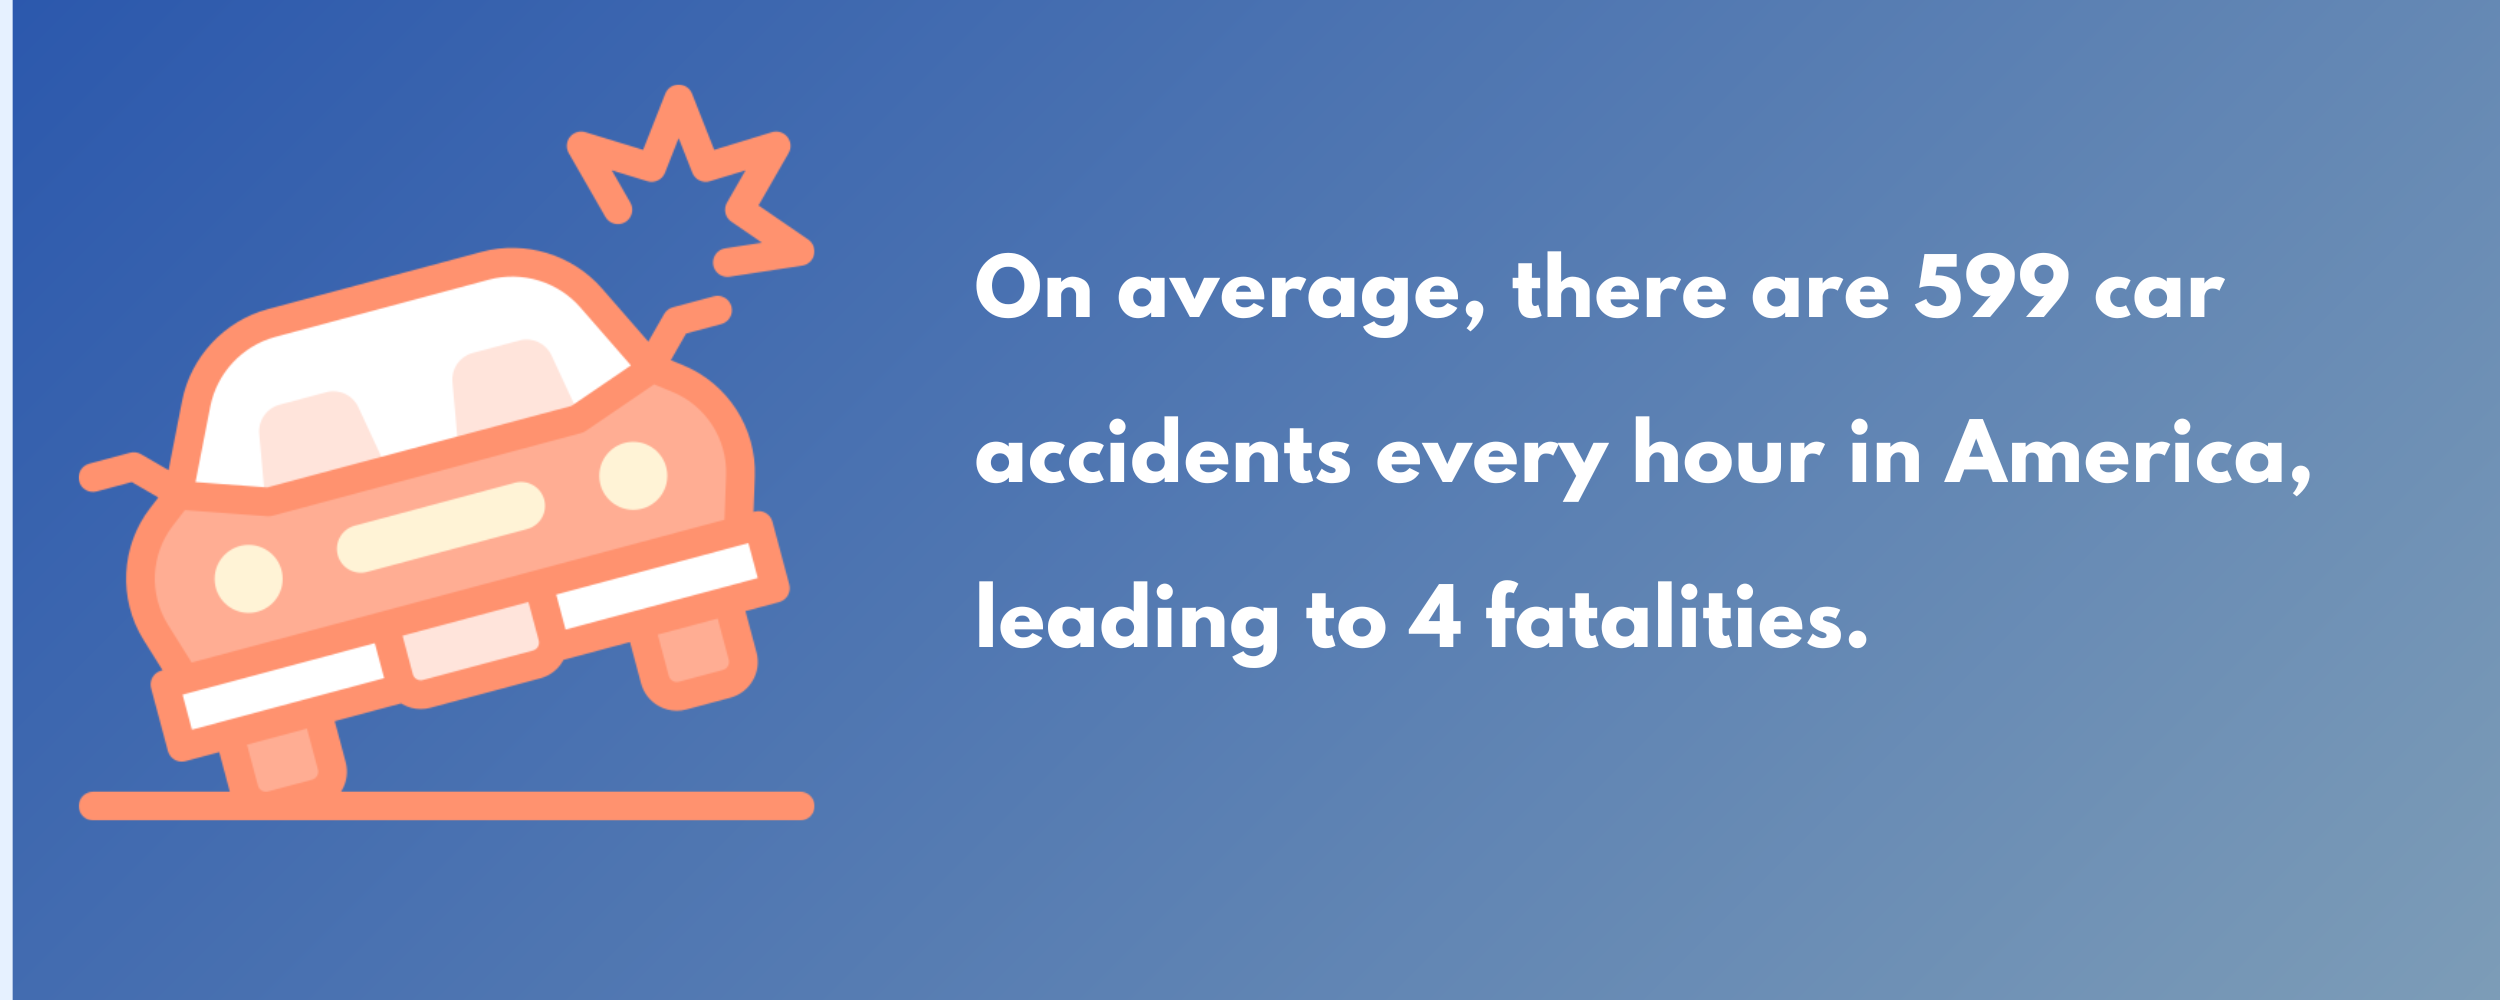 how many car accidents and fatalities in America every hour